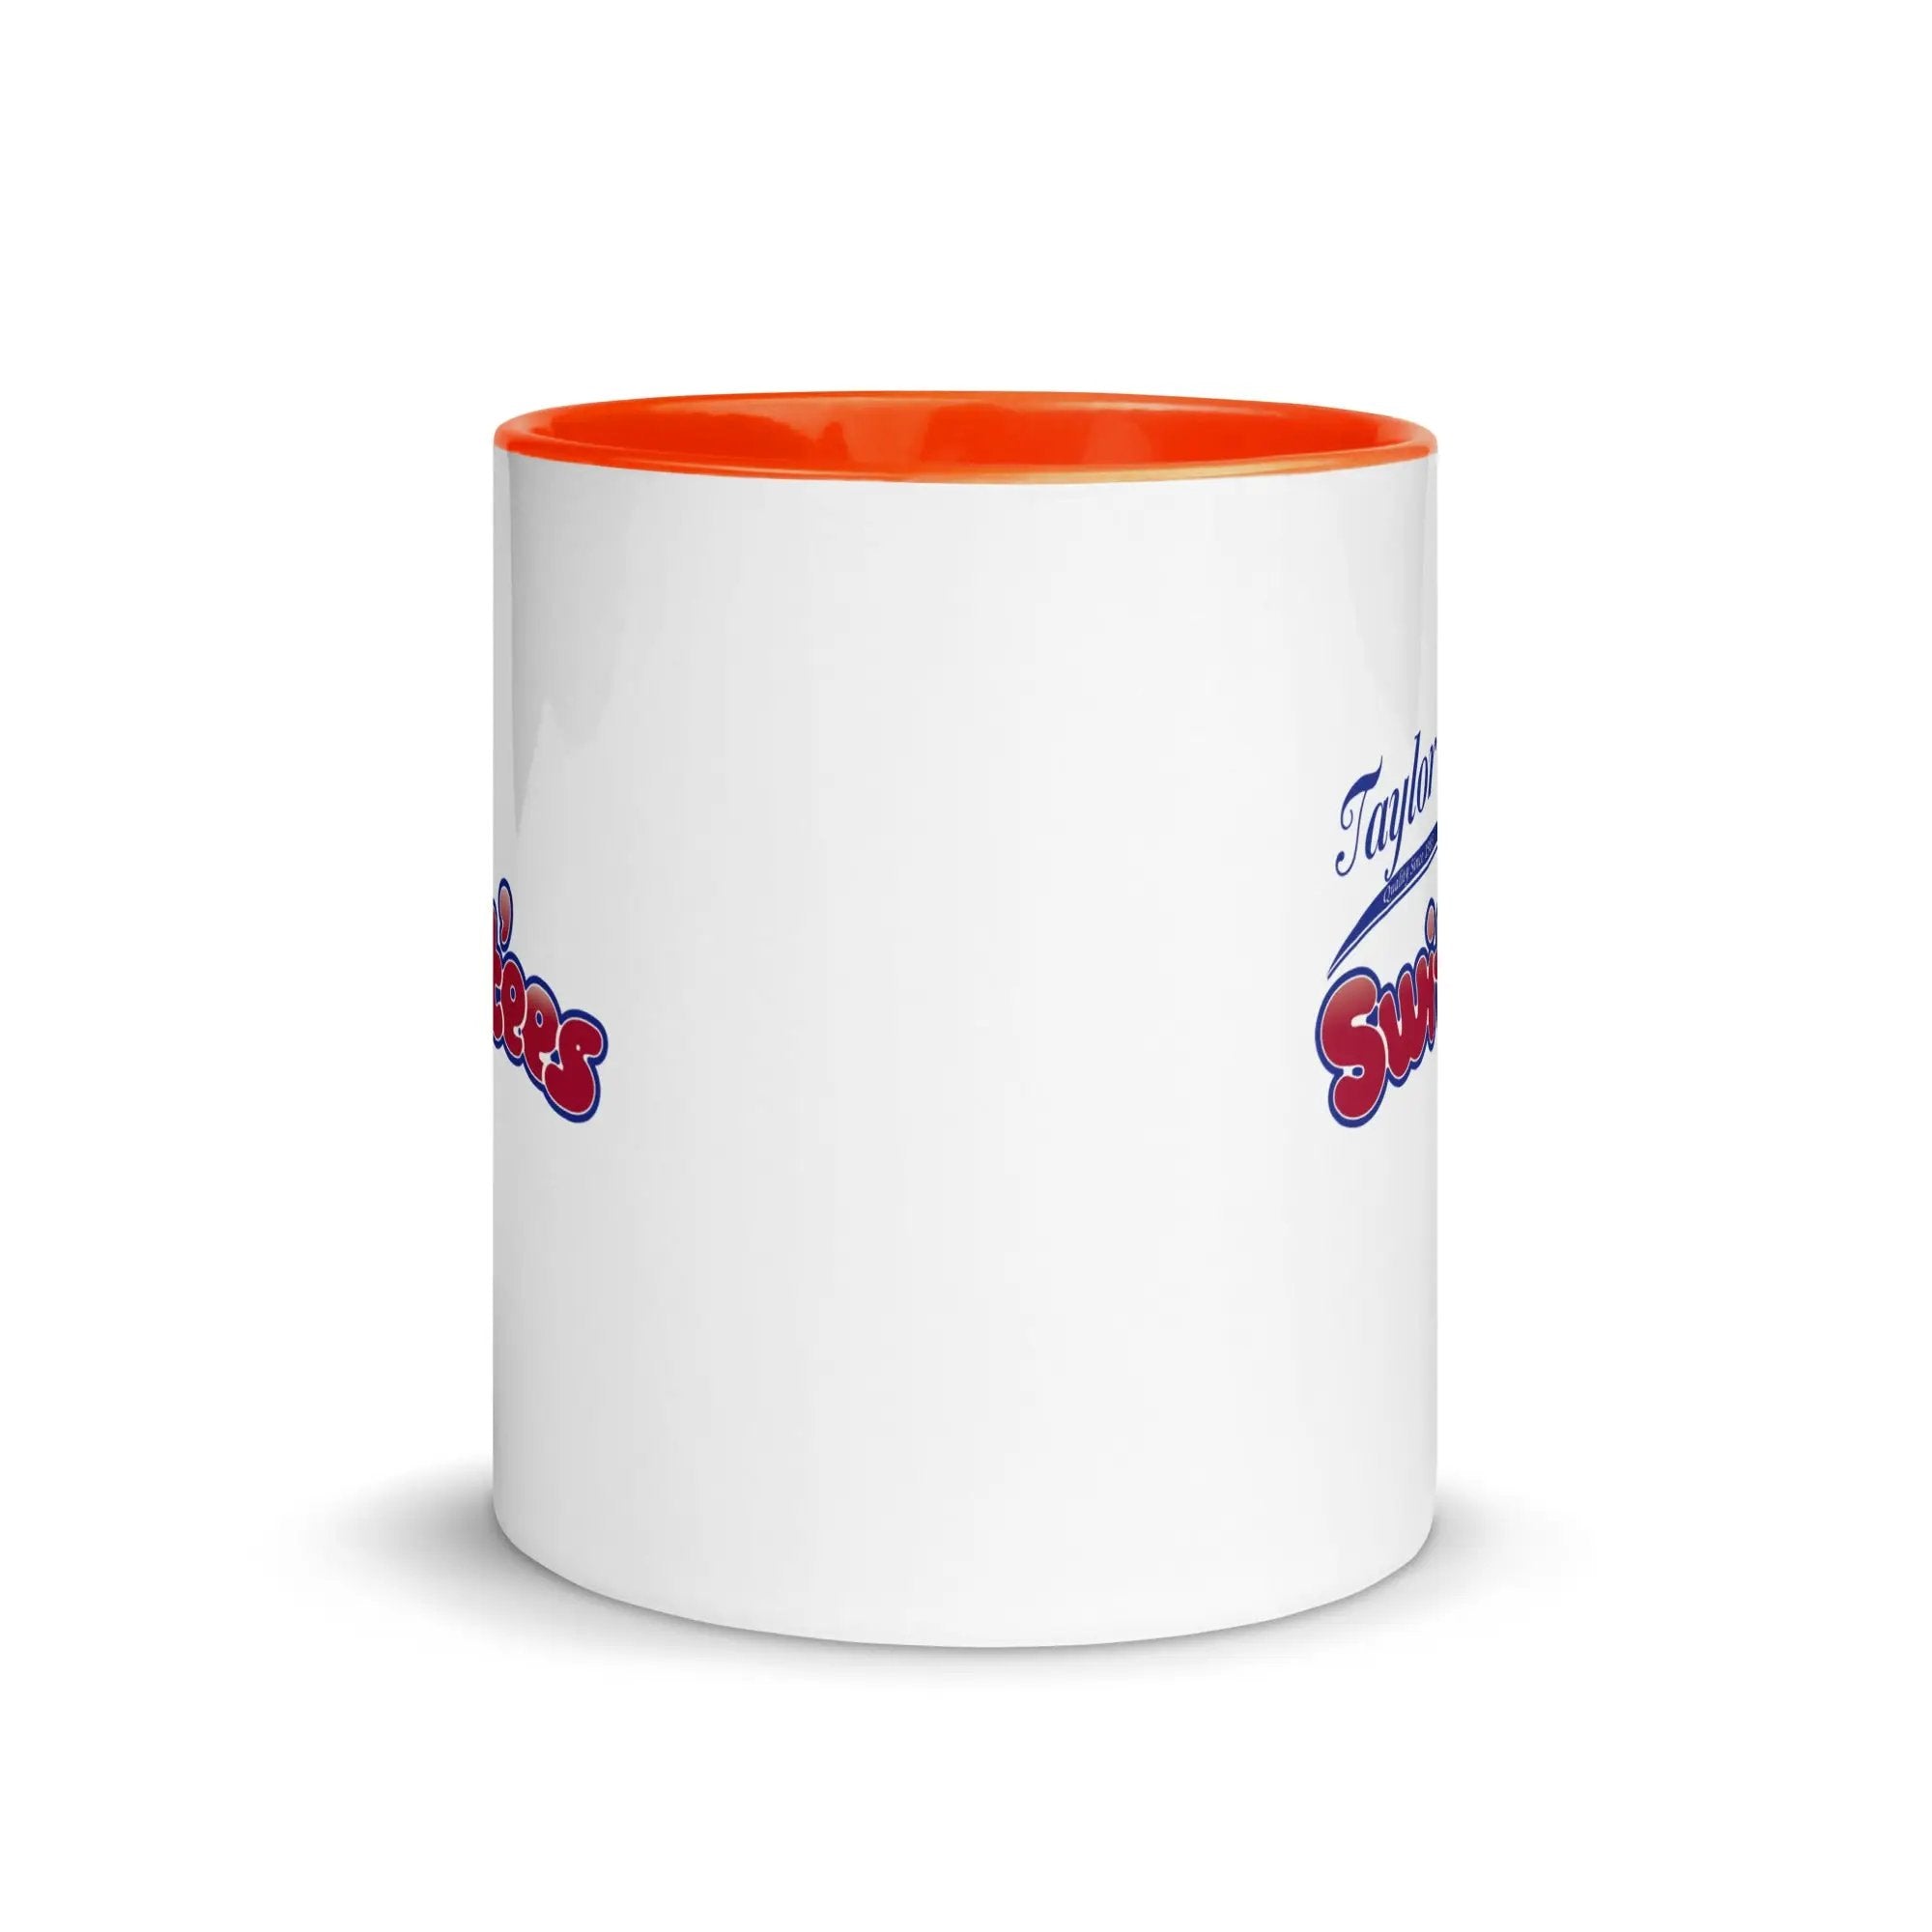 Swift'ees Mug with Color Inside